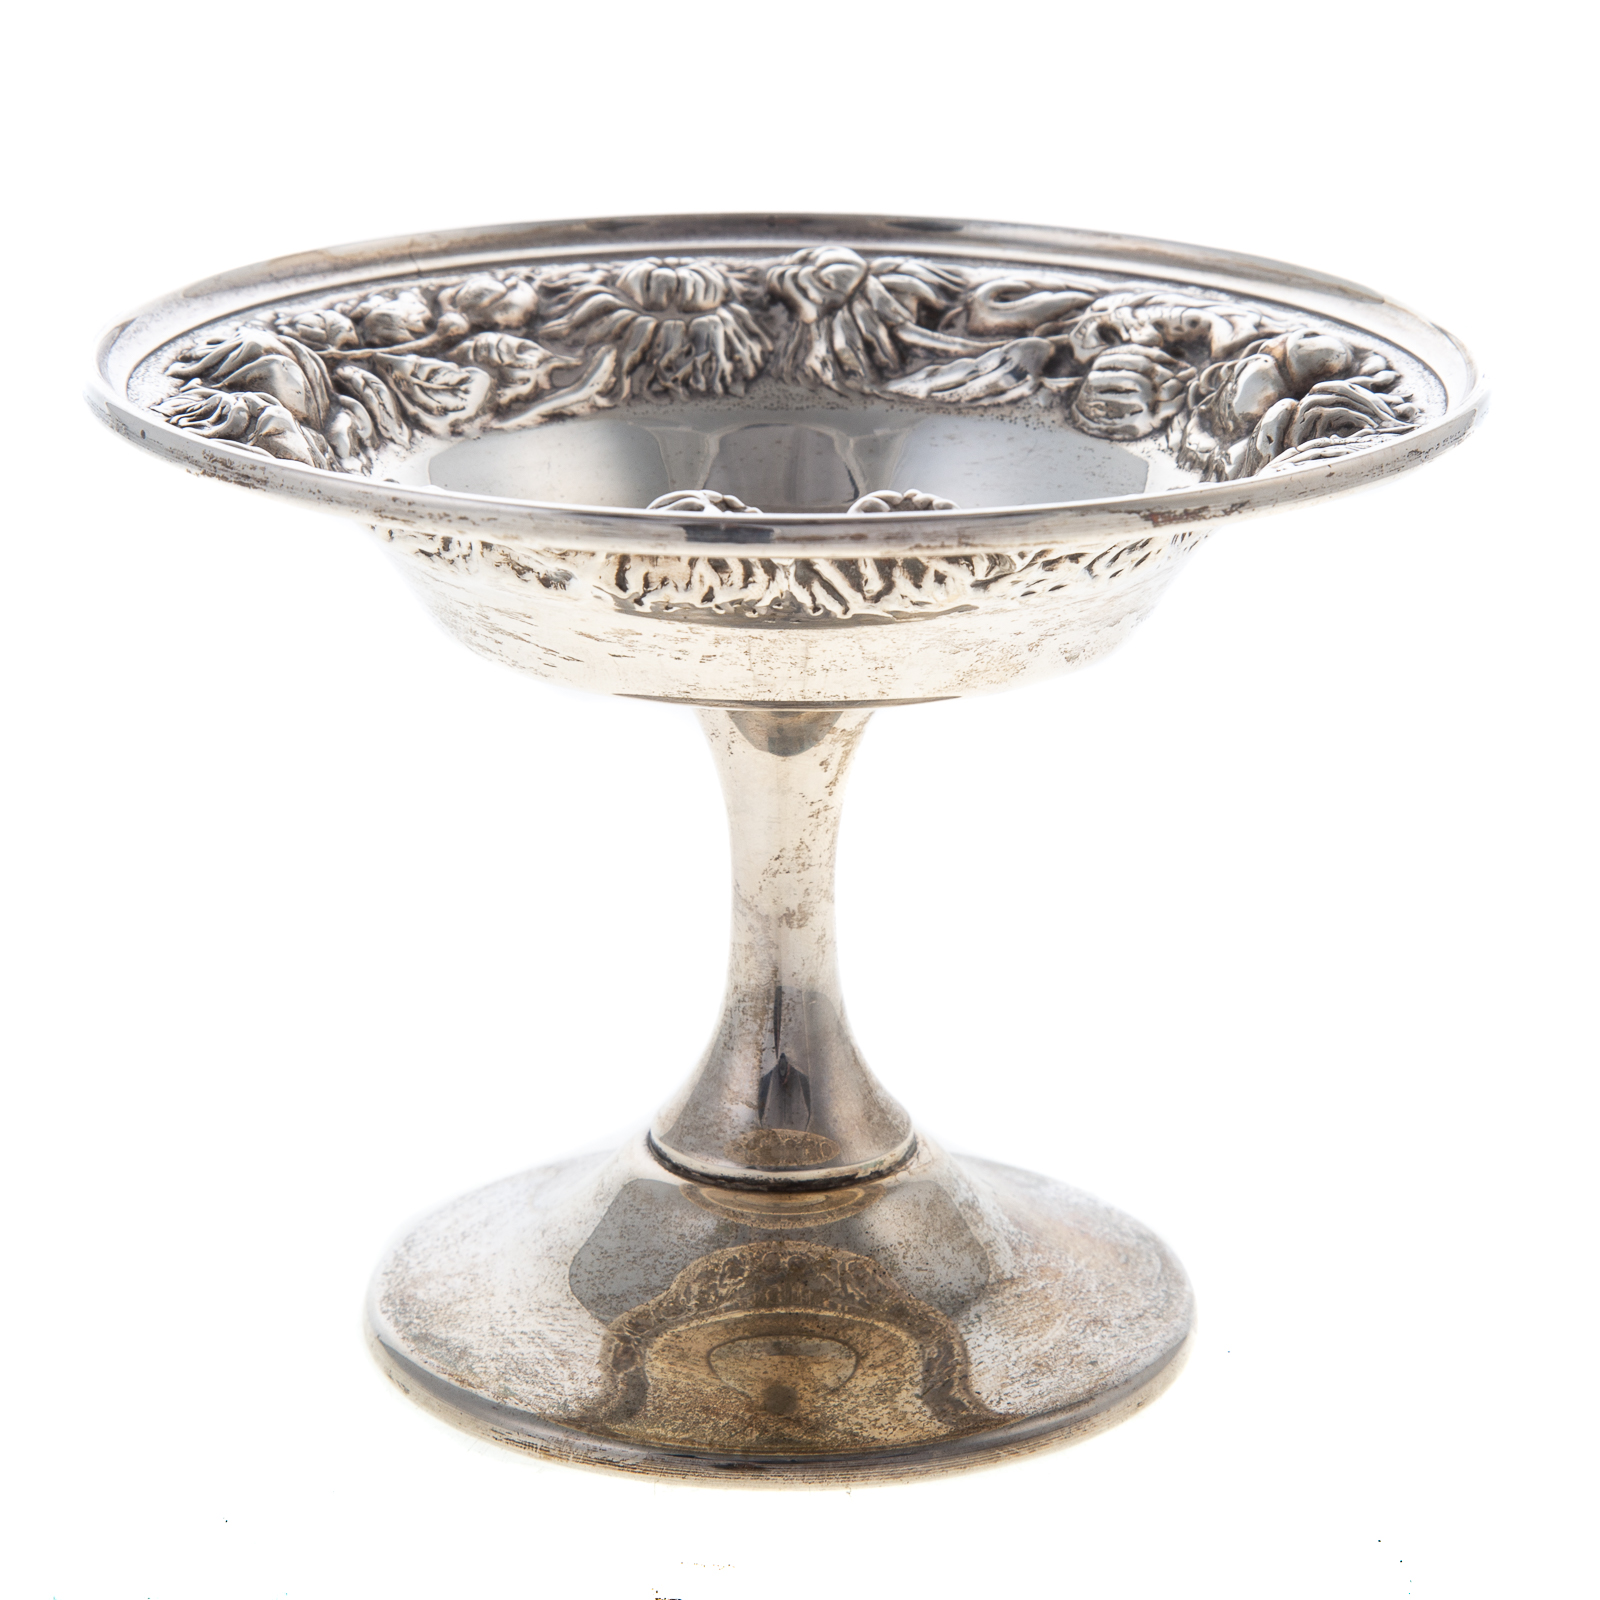 STIEFF STERLING REPOUSSE PEDESTAL DISH